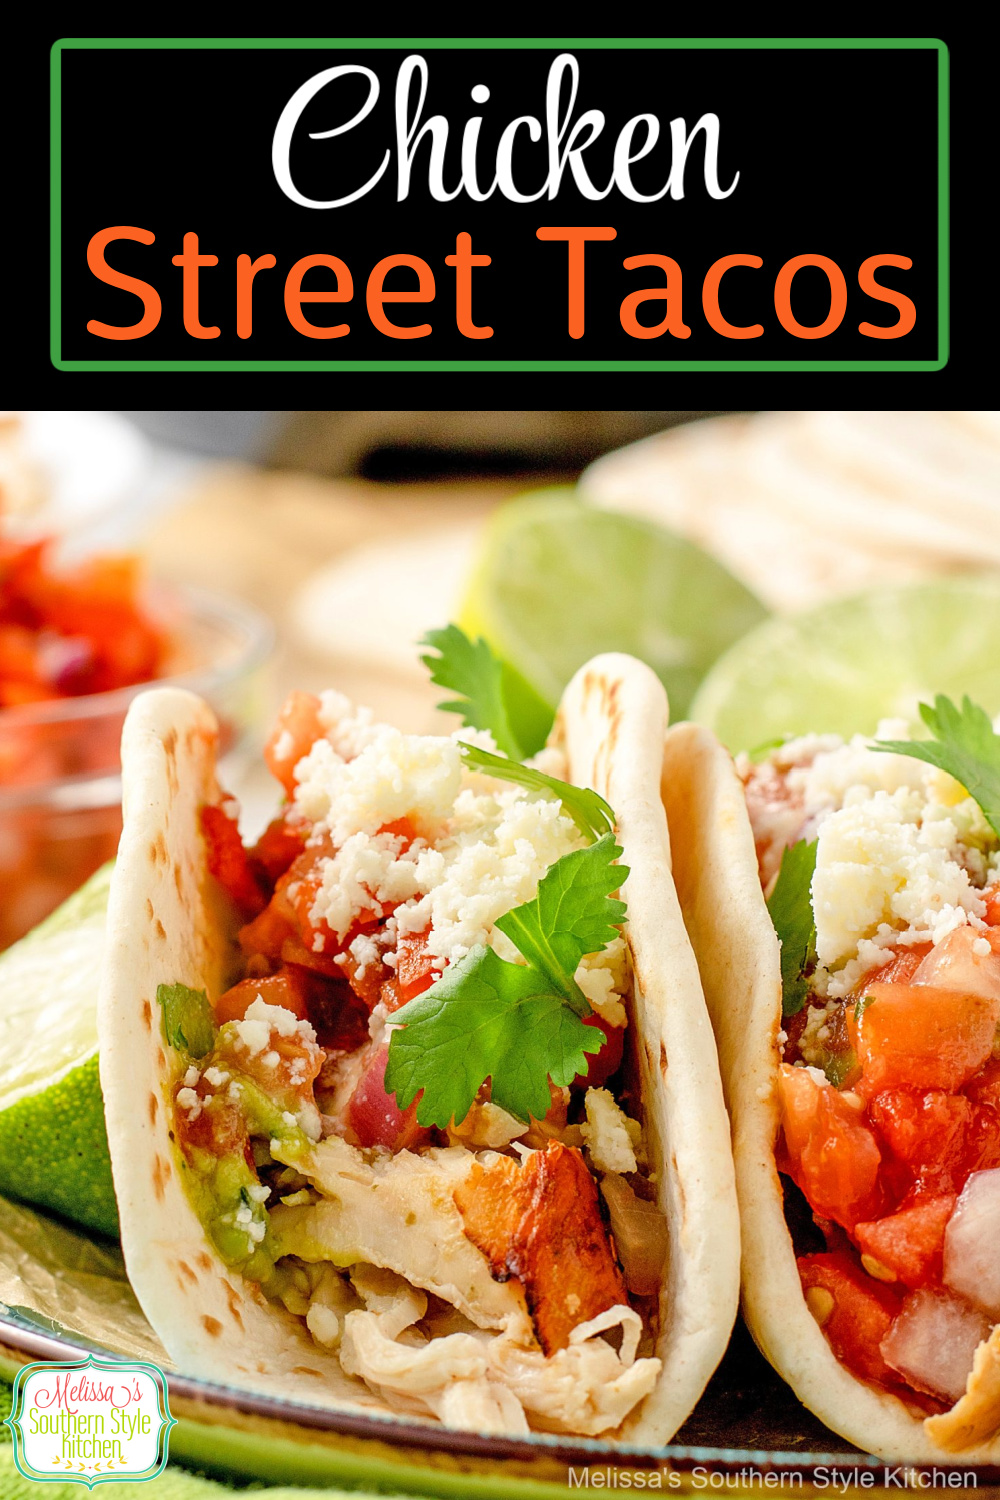 This easy salsa verde Chicken Street Tacos recipe can be made in an air fryer, on the grill or roasted in the oven! #airfryertacos #chickenstreettacos #tacorecipes #easychickenbreastrecipes #easystreettacos #tacotuesday #chickentacos #airfryerrecipes #grilledchickenrecipes via @melissasssk